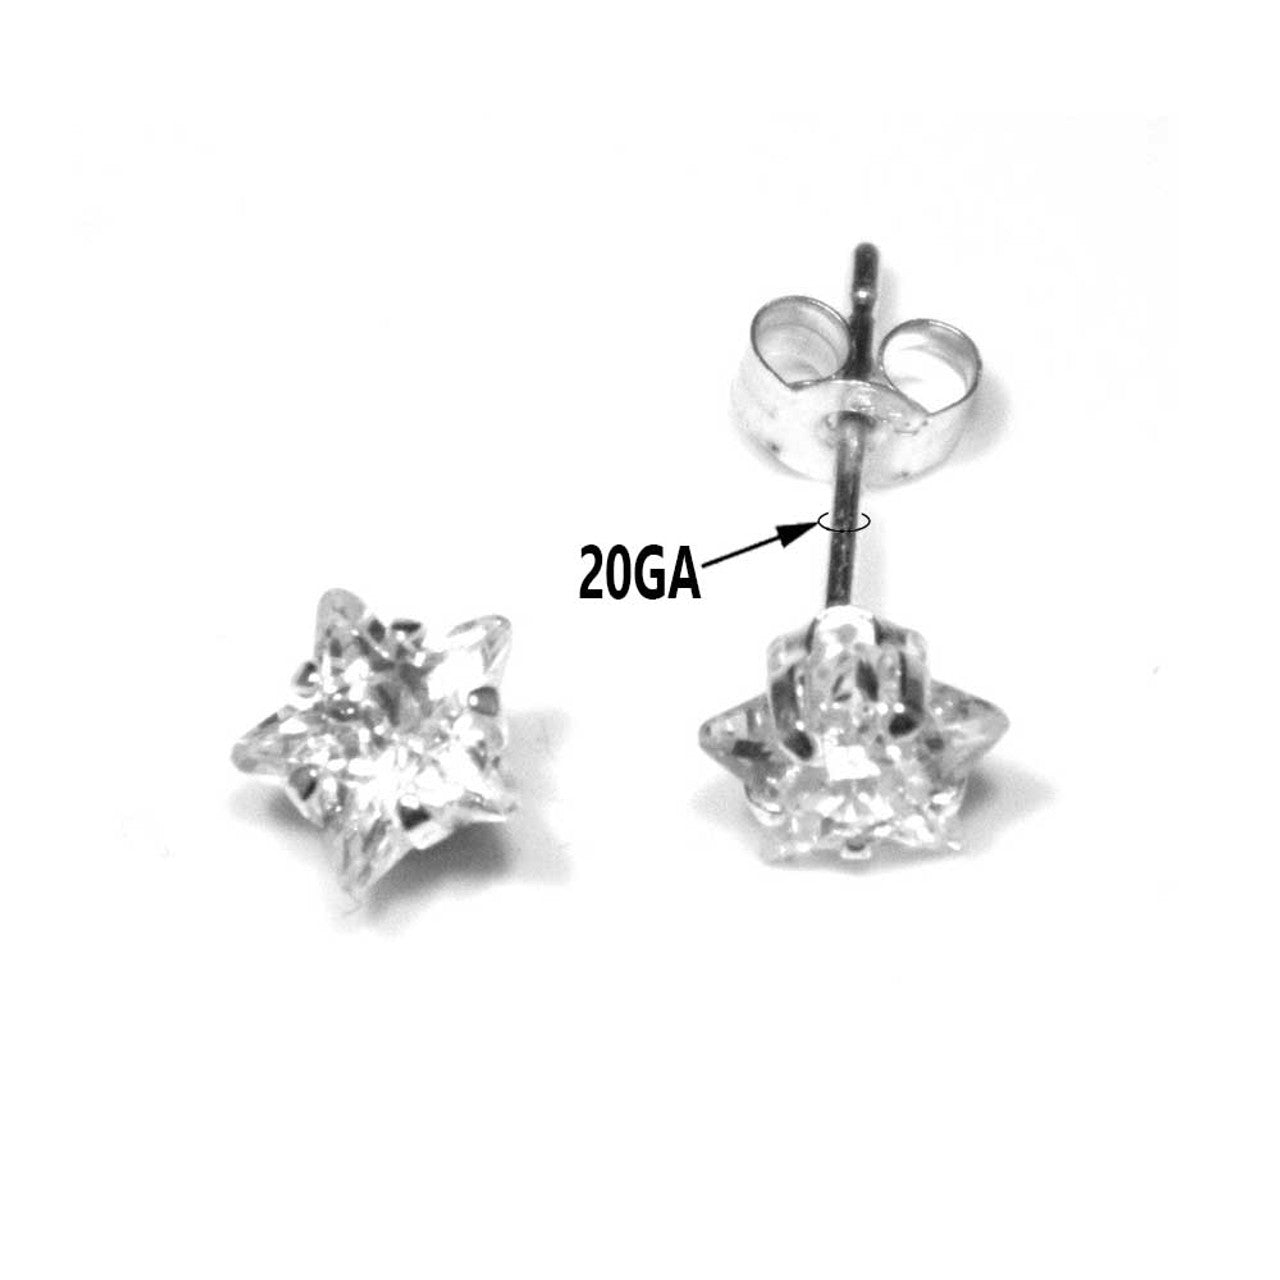 Surgical Steel Earring Stud 20 Gauge With Star Shaped CZ Gem